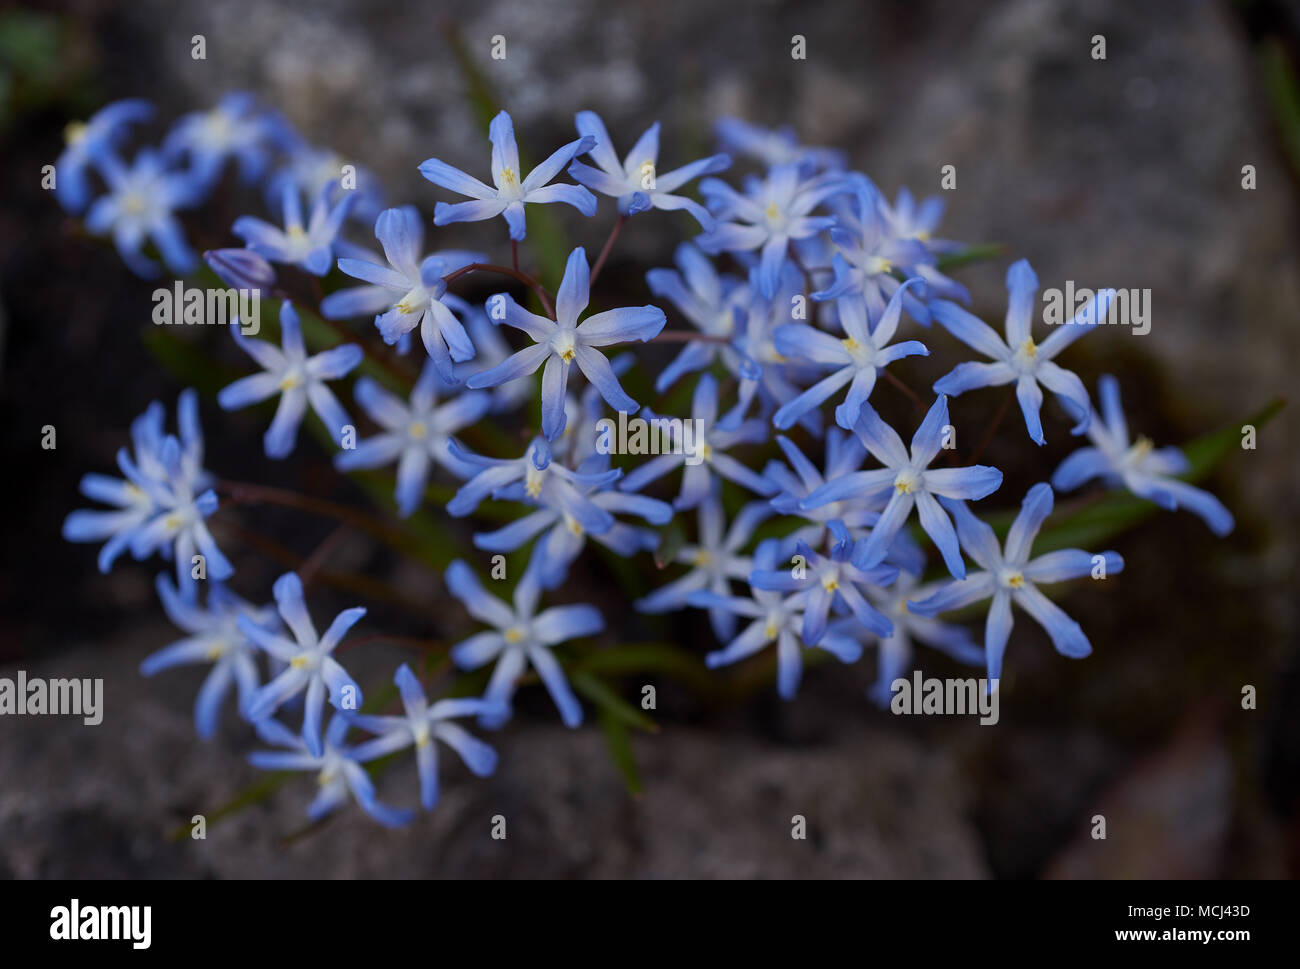 Scilla forbesii flowers Chionodoxa forbesii Forbes' glory-of-the-snow blooming Stock Photo